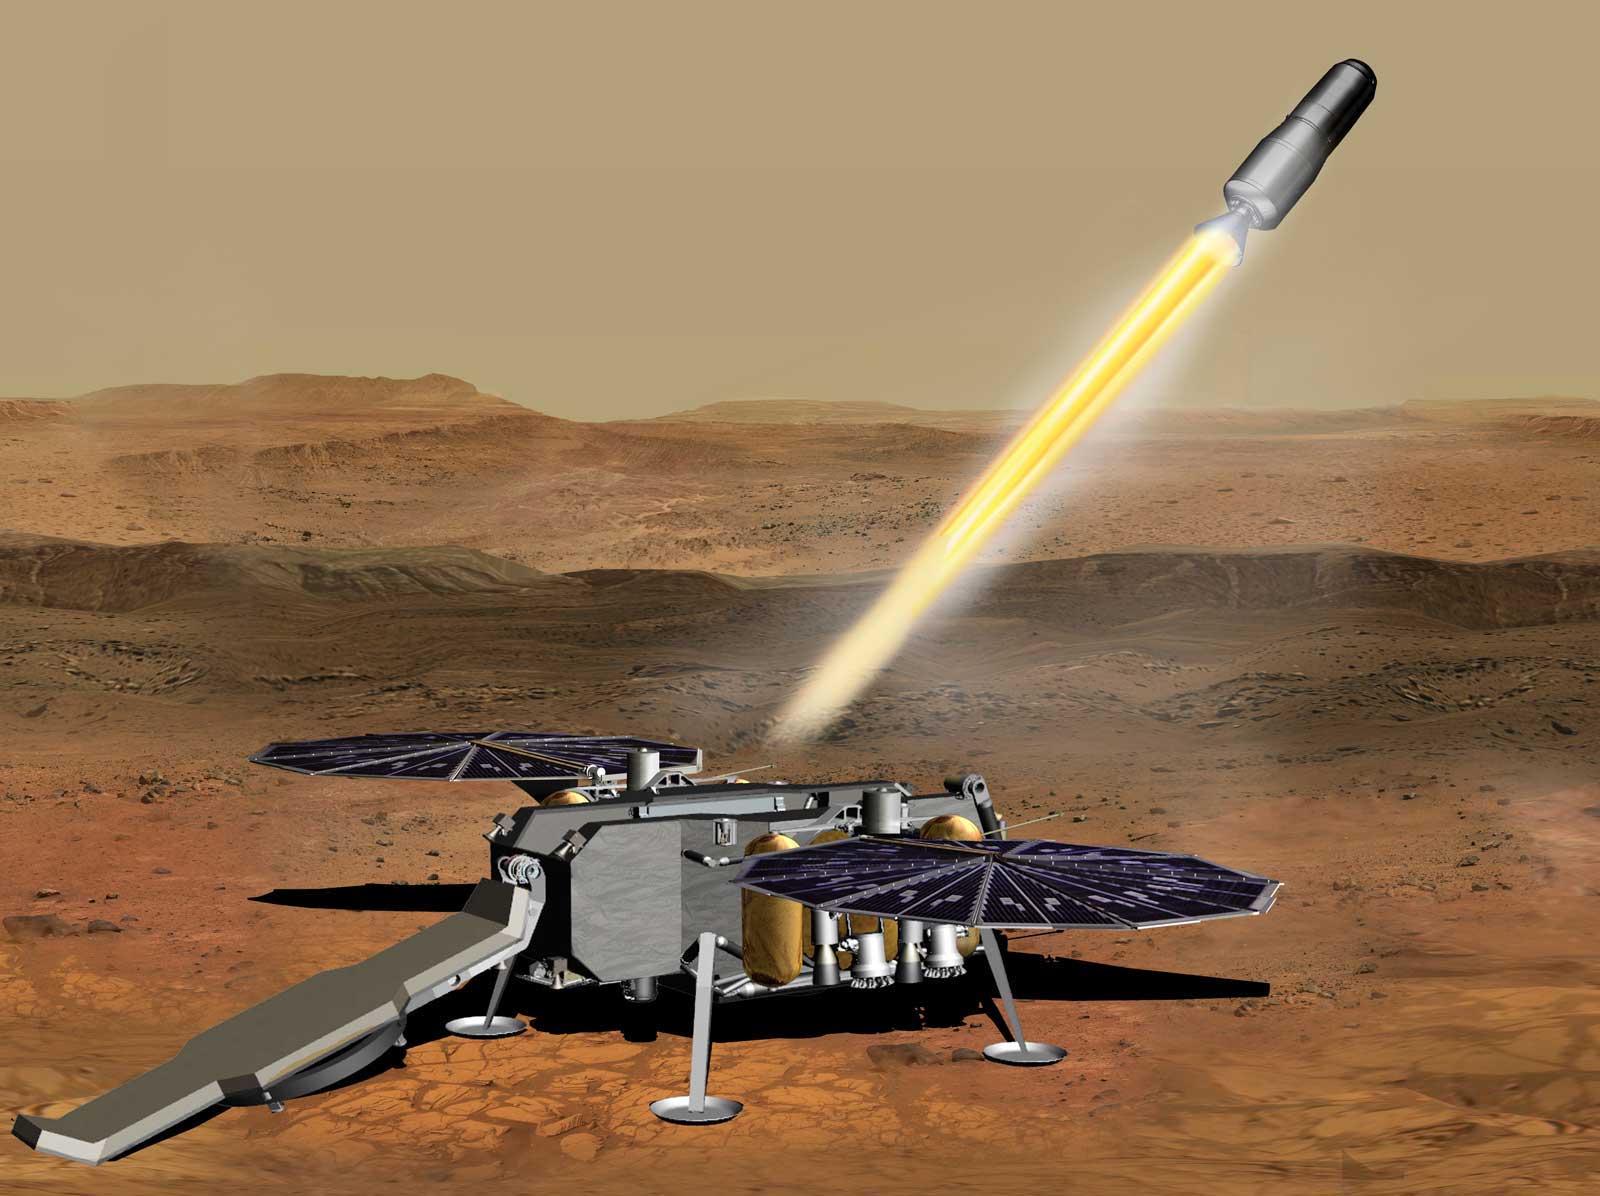 This miniature rocket could be the first NASA craft launched from Mars